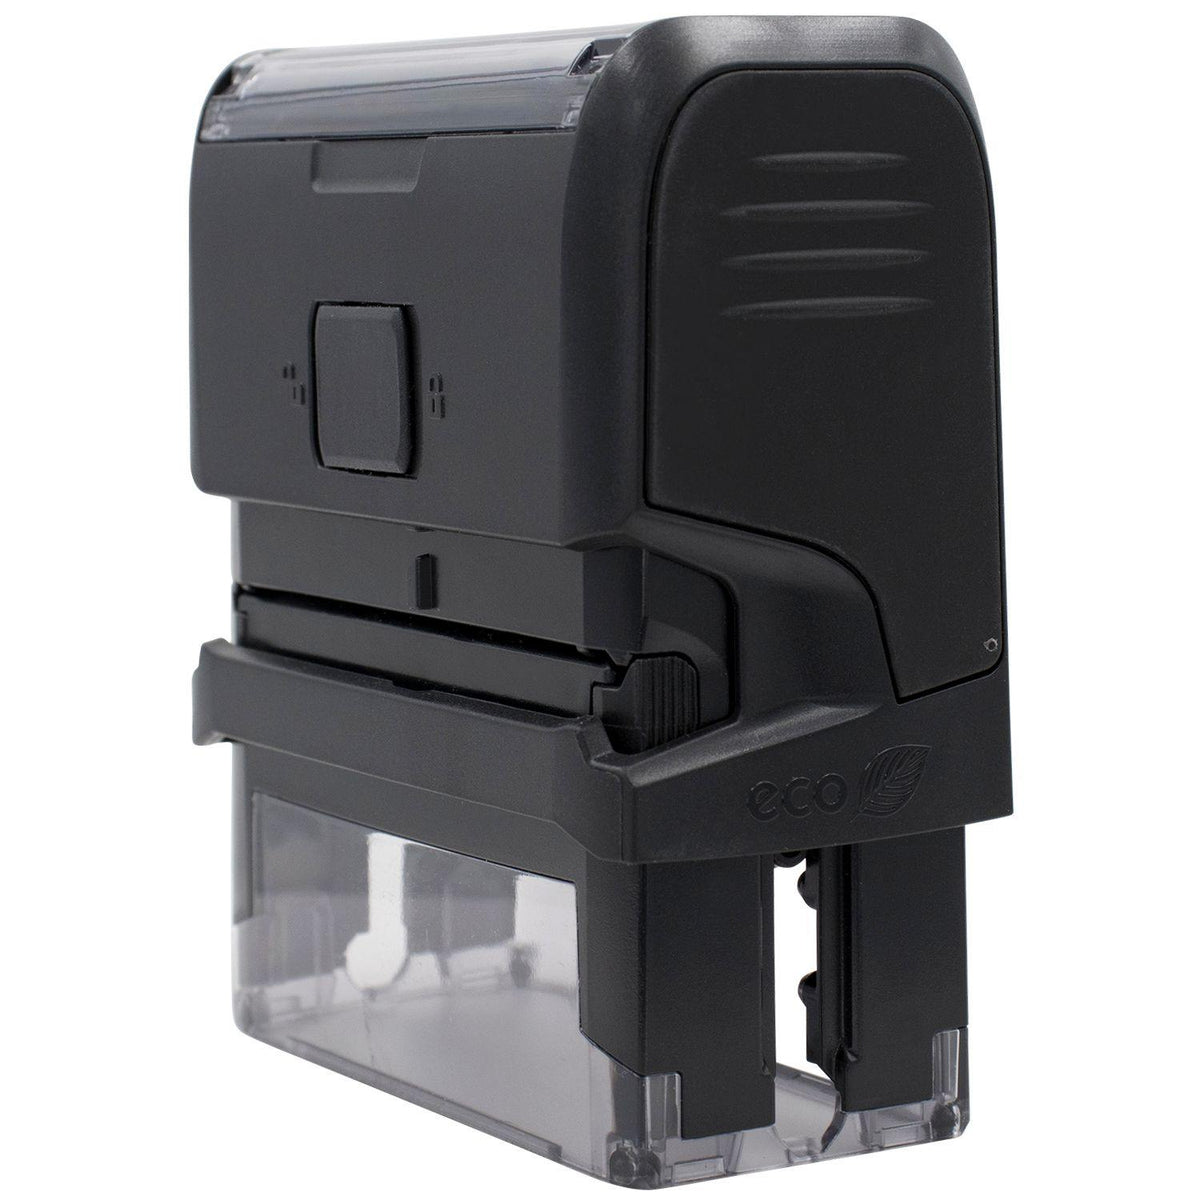 Self-Inking Special Stamp - Engineer Seal Stamps - Brand_Trodat, Impression Size_Small, Stamp Type_Self-Inking Stamp, Type of Use_General, Type of Use_Postal &amp; Mailing